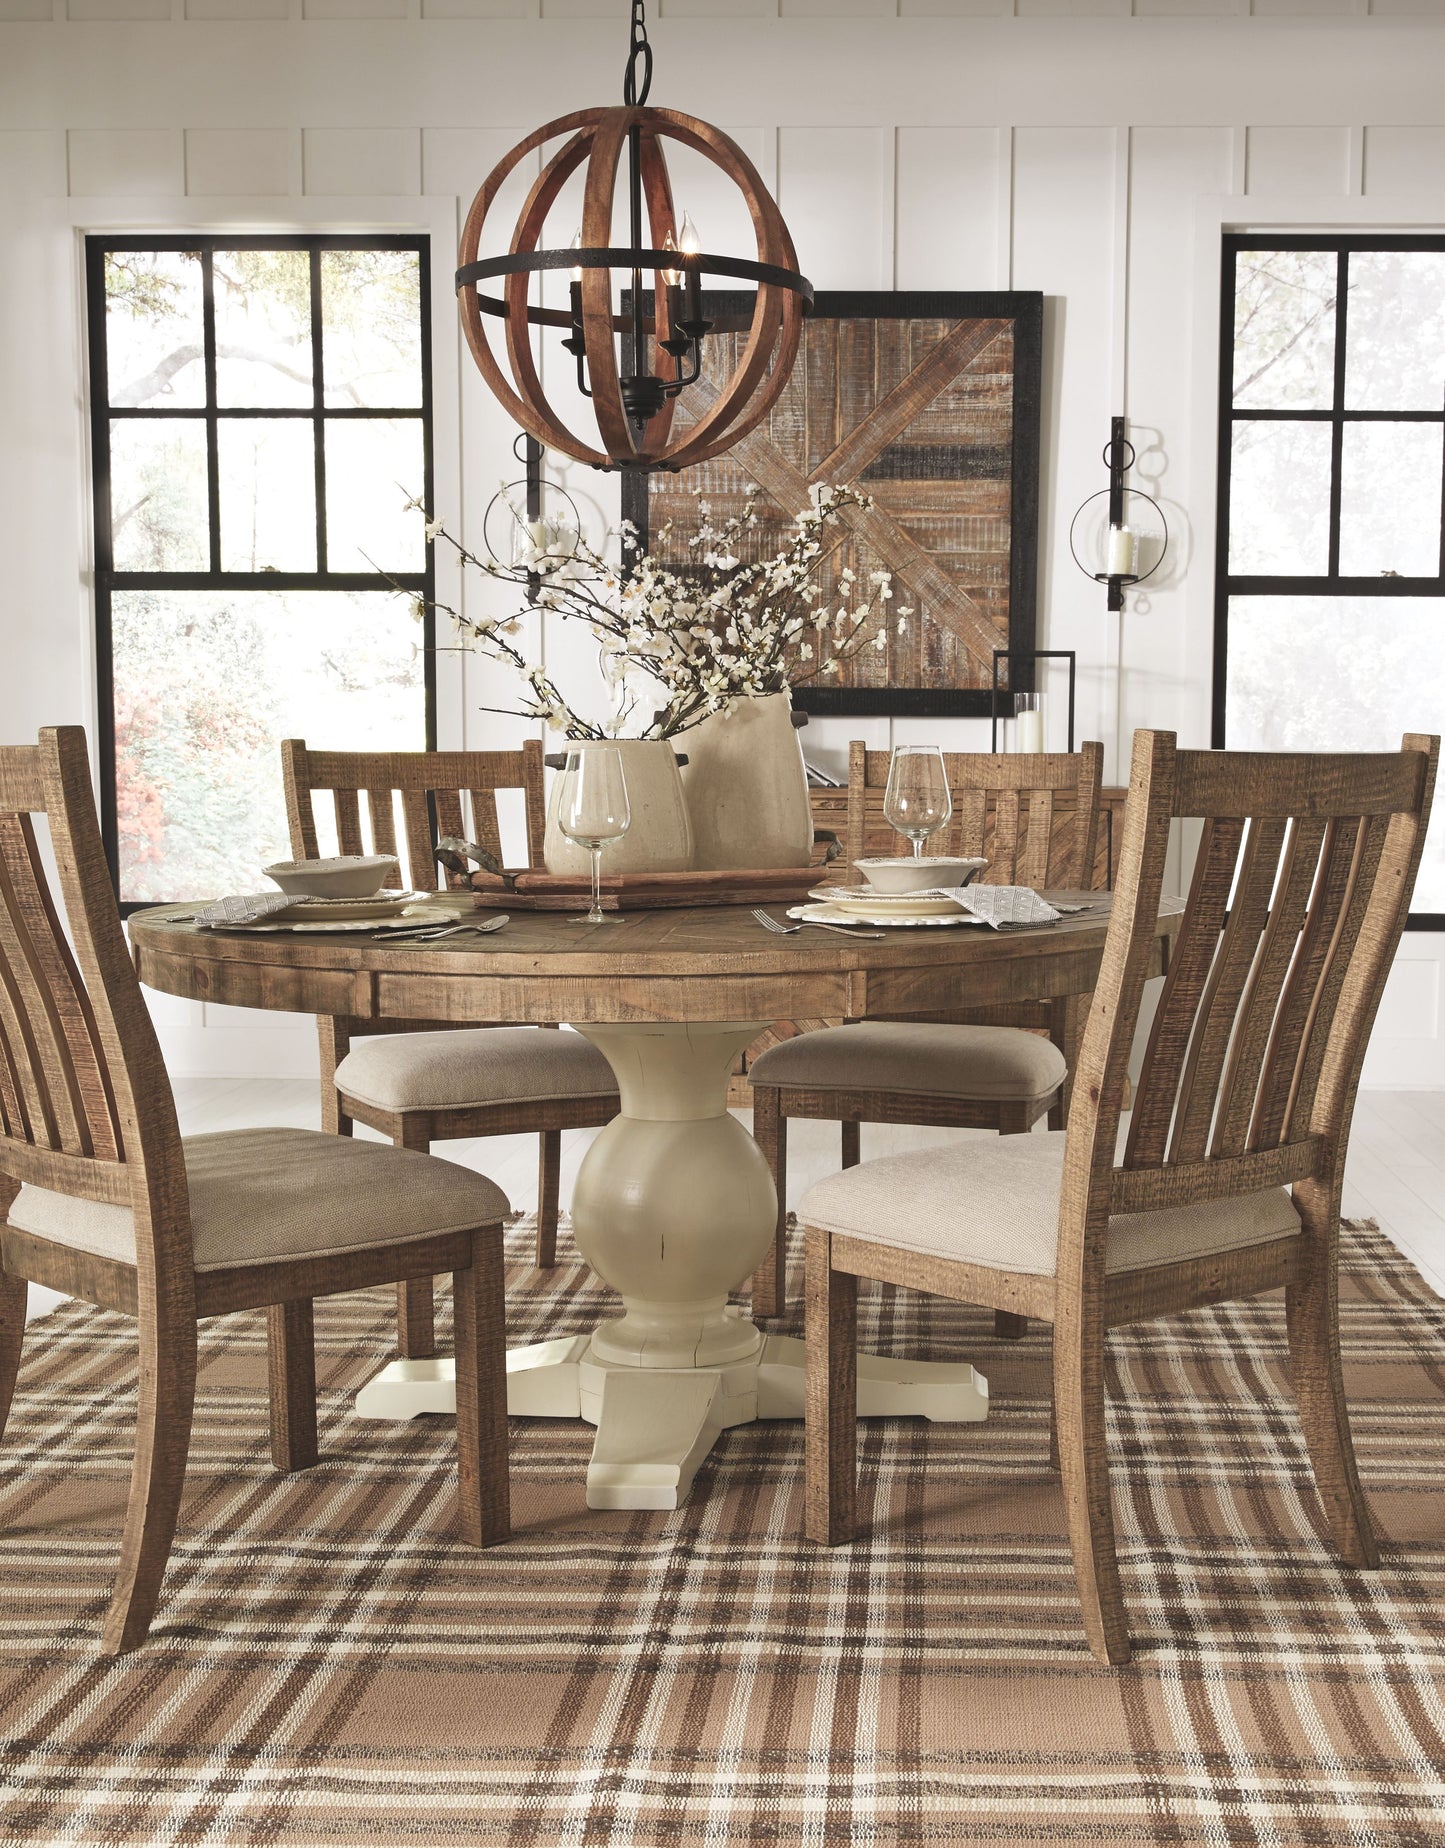 Grindleburg - Light Brown - Dining Uph Side Chair (Set of 2)